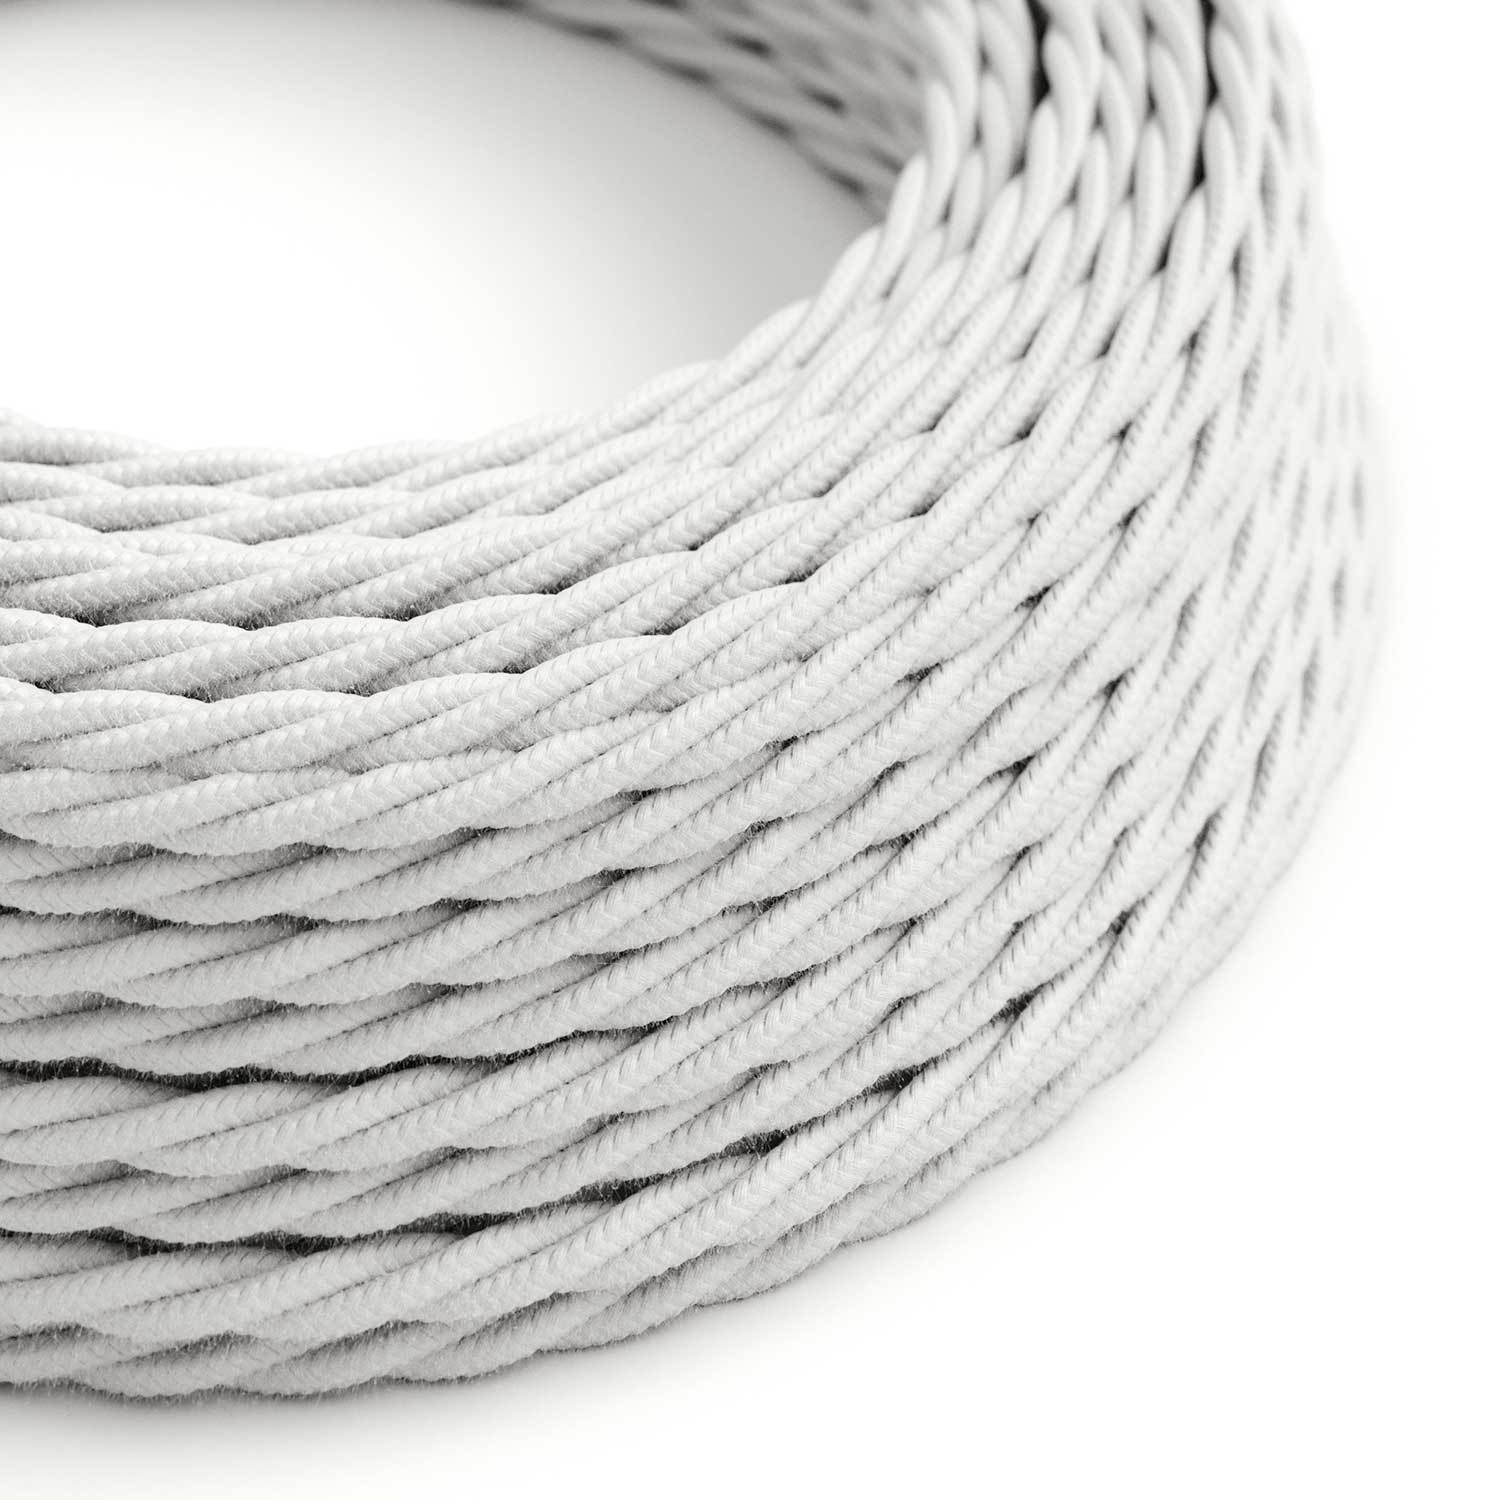 https://www.creative-cables.us/95229-big_default/white-cotton-covered-twisted-electric-cable-2x18-awg-tc01.jpg